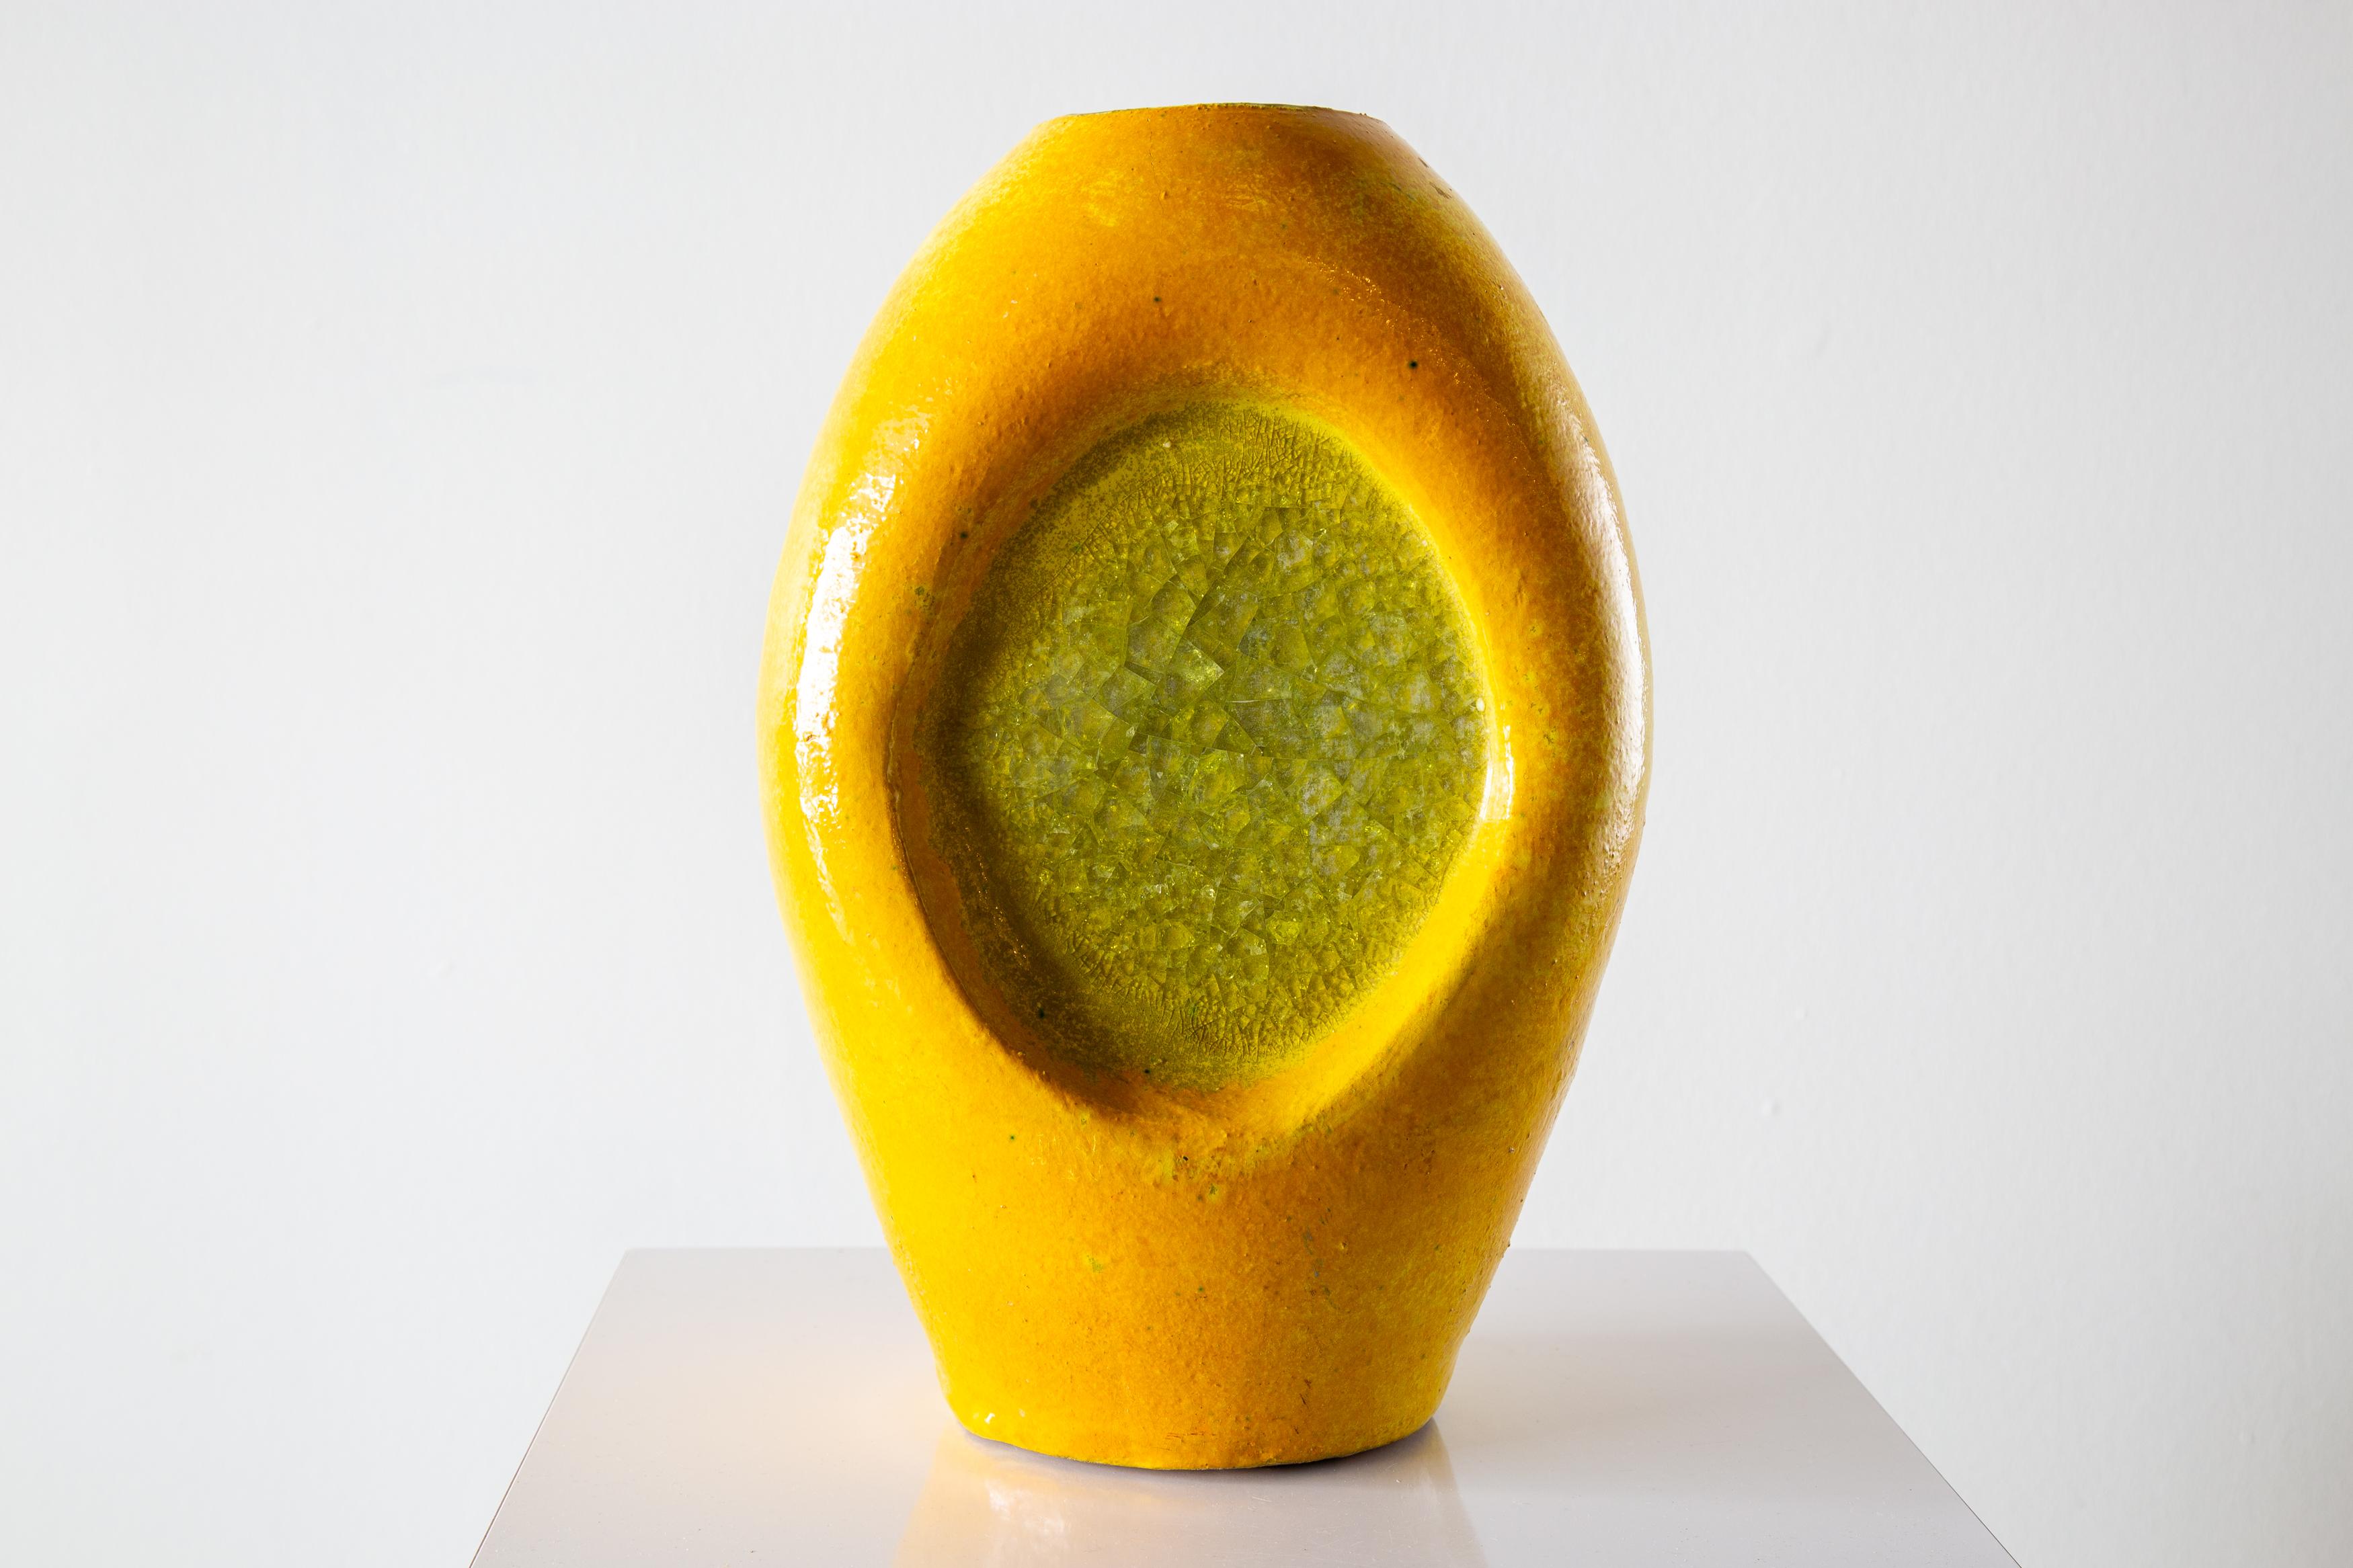 A 1950s large Bitossi fritte vase. Melted green and fused glass sits crackeled inside a dimpled yellow glazed stone form.  Large scale at 13.5” high, and 9” Wide. this is a statement piece. A great pop of yellow and green. Heavy weight. A fine